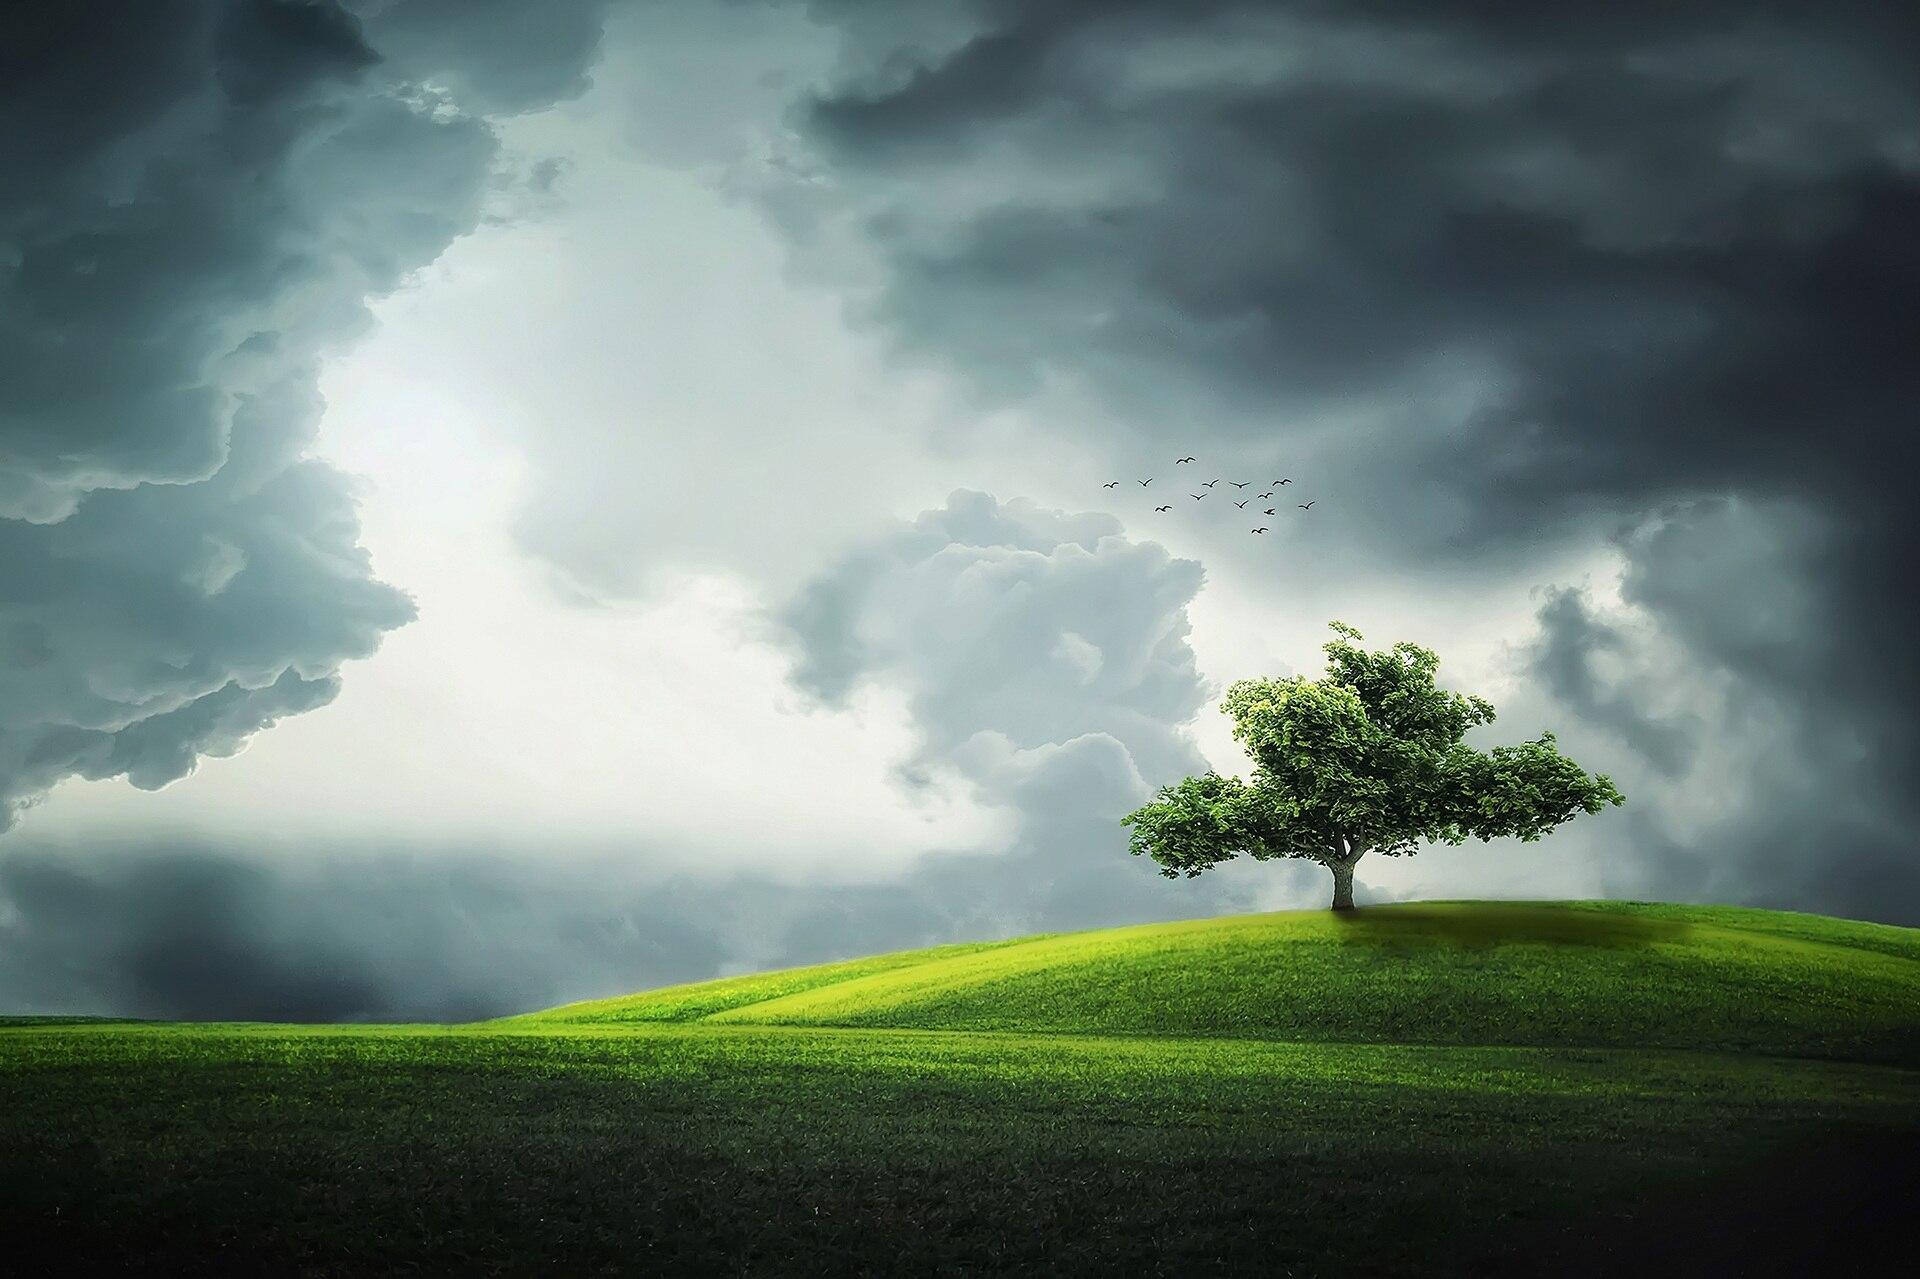 A large green field of grass with a single tree on one of the hills with birds in the sky underneath lots of dark clouds.